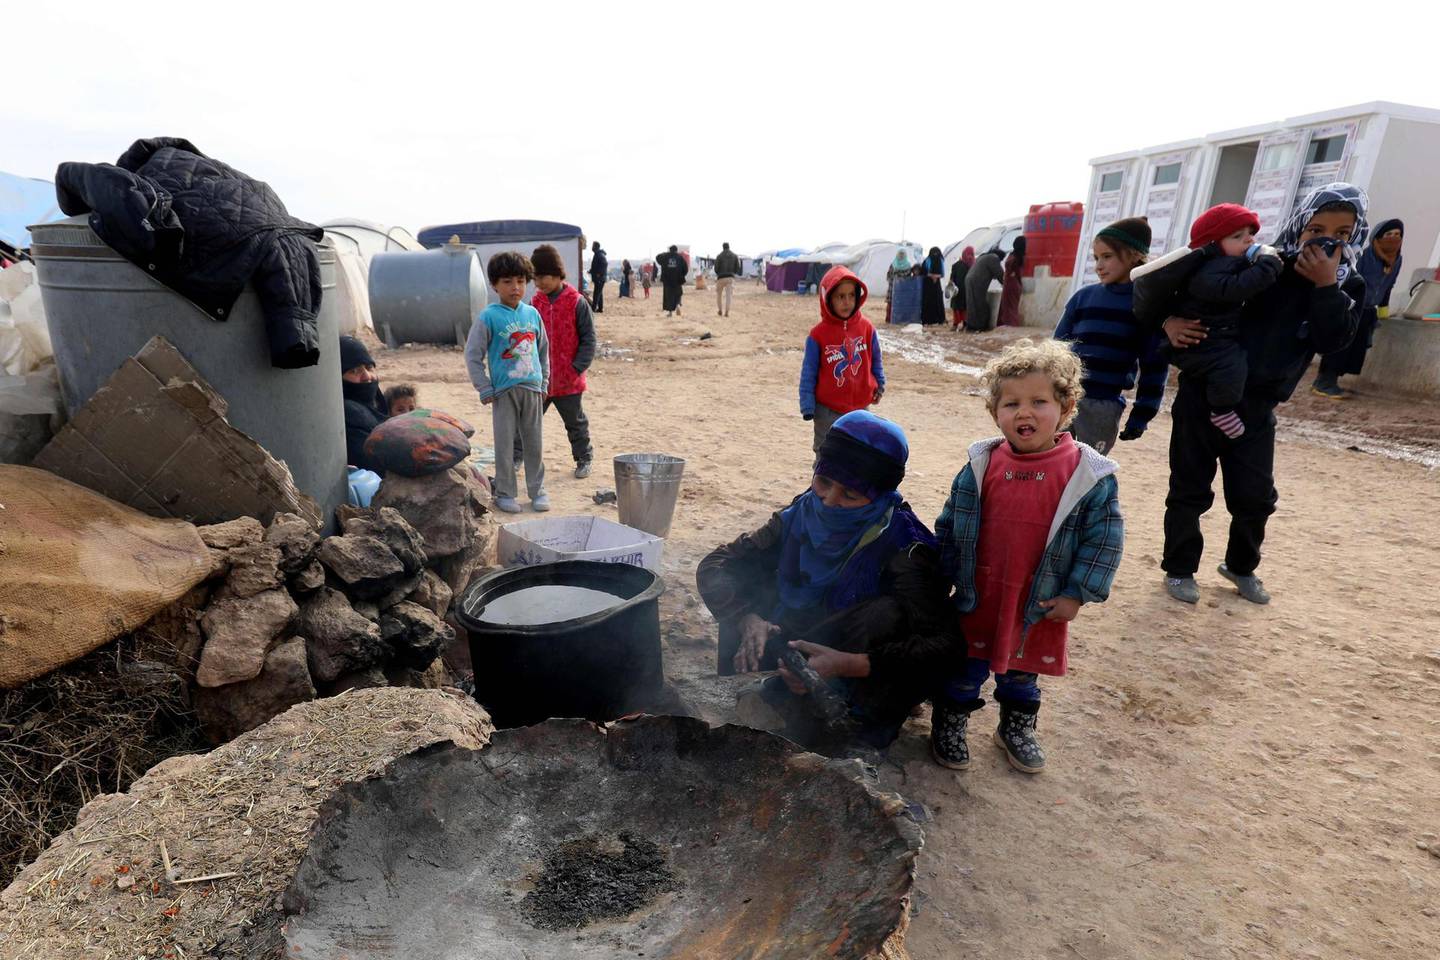 Displaced Syrians, from the eastern city of Deir Ezzor and Raqa who were forced to leave by the war against the Islamic State (IS) group, prepare food at the Ain Issa camp on December 18, 2017.  
As temperatures drop, tens of thousands of civilians forced out of their homes by Syria's war are spending yet another winter in flimsy plastic tents or abandoned half-finished buildings. And without heating, blankets and warm clothes, or access to proper medical care, even a simple cold can turn deadly. / AFP PHOTO / Delil souleiman